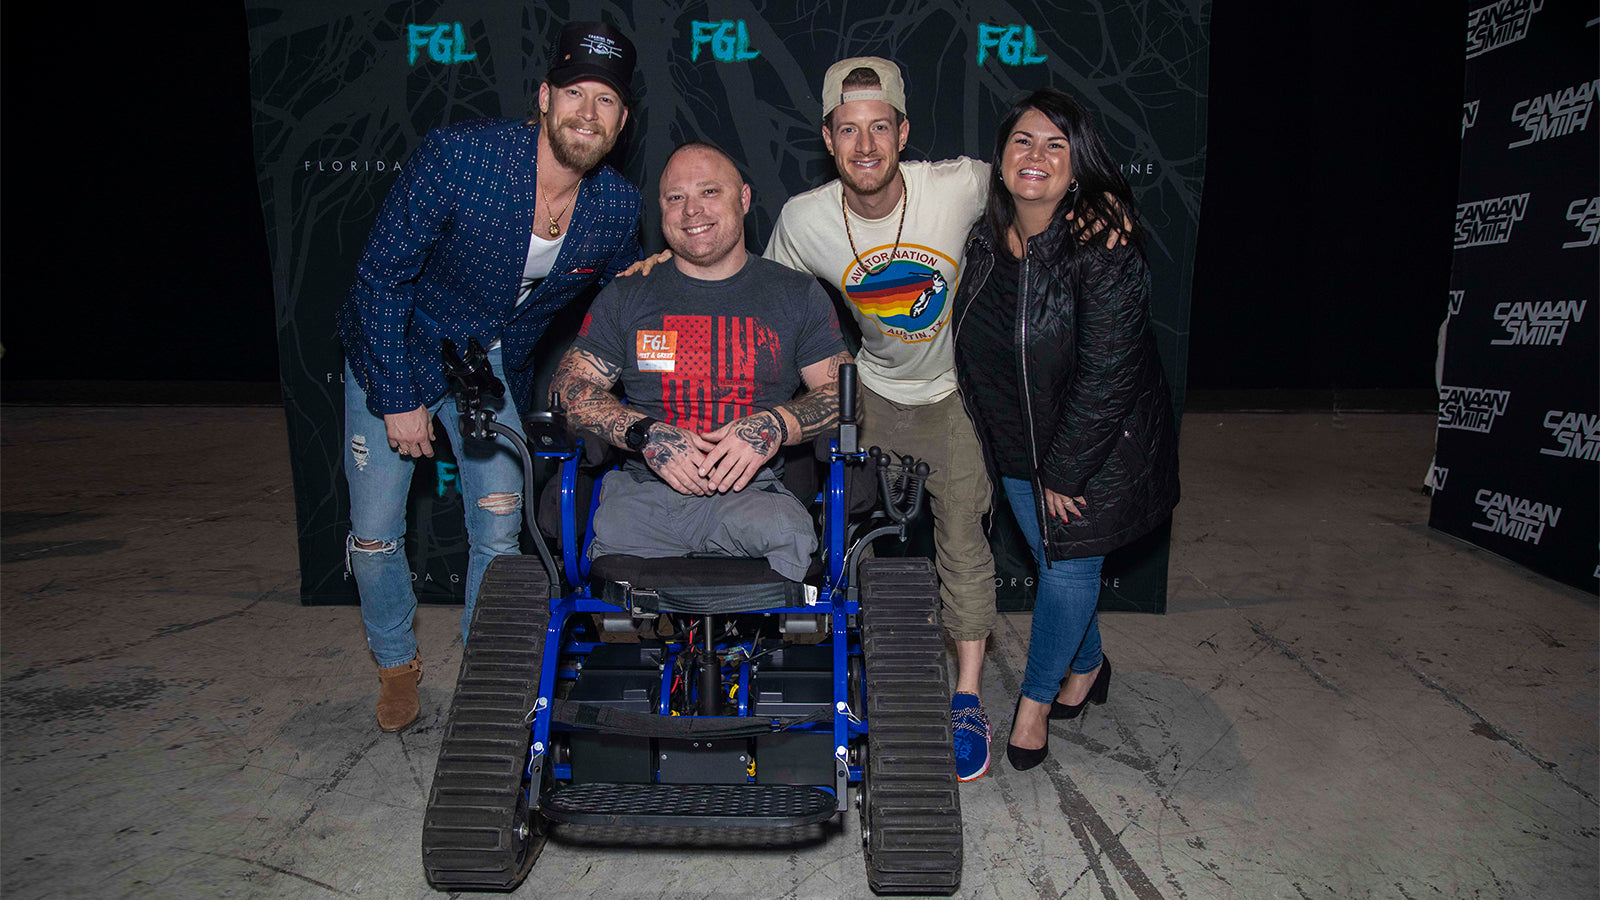 Florida Georgia Line poses for a photo with a man in a wheelchair and woman.